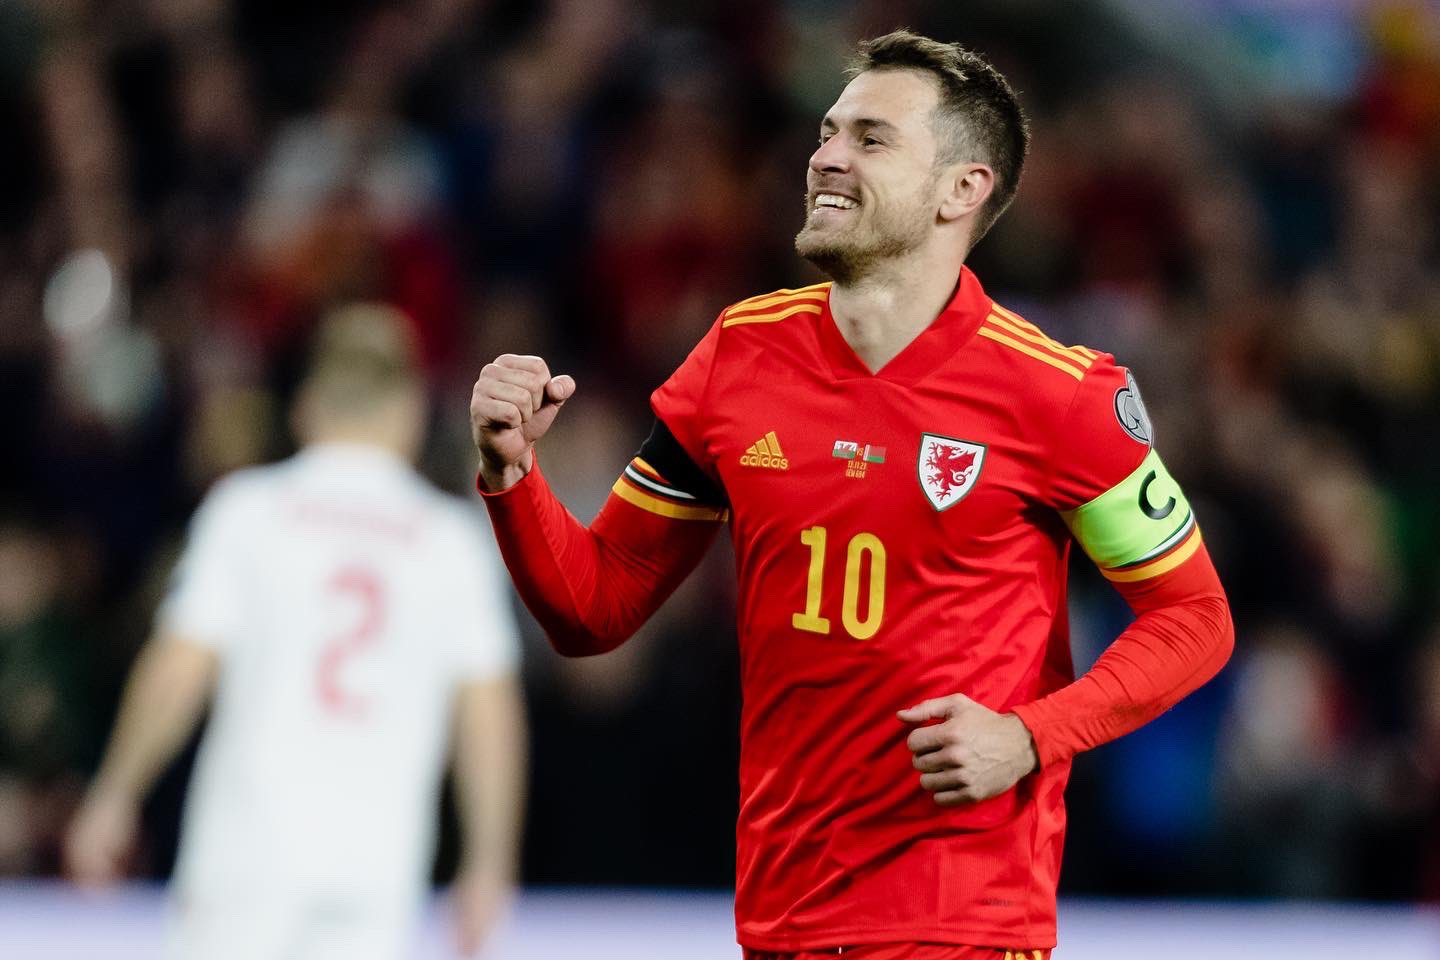 Opportunities to qualify for World Cup don’t come along very often, proclaims Aaron Ramsey